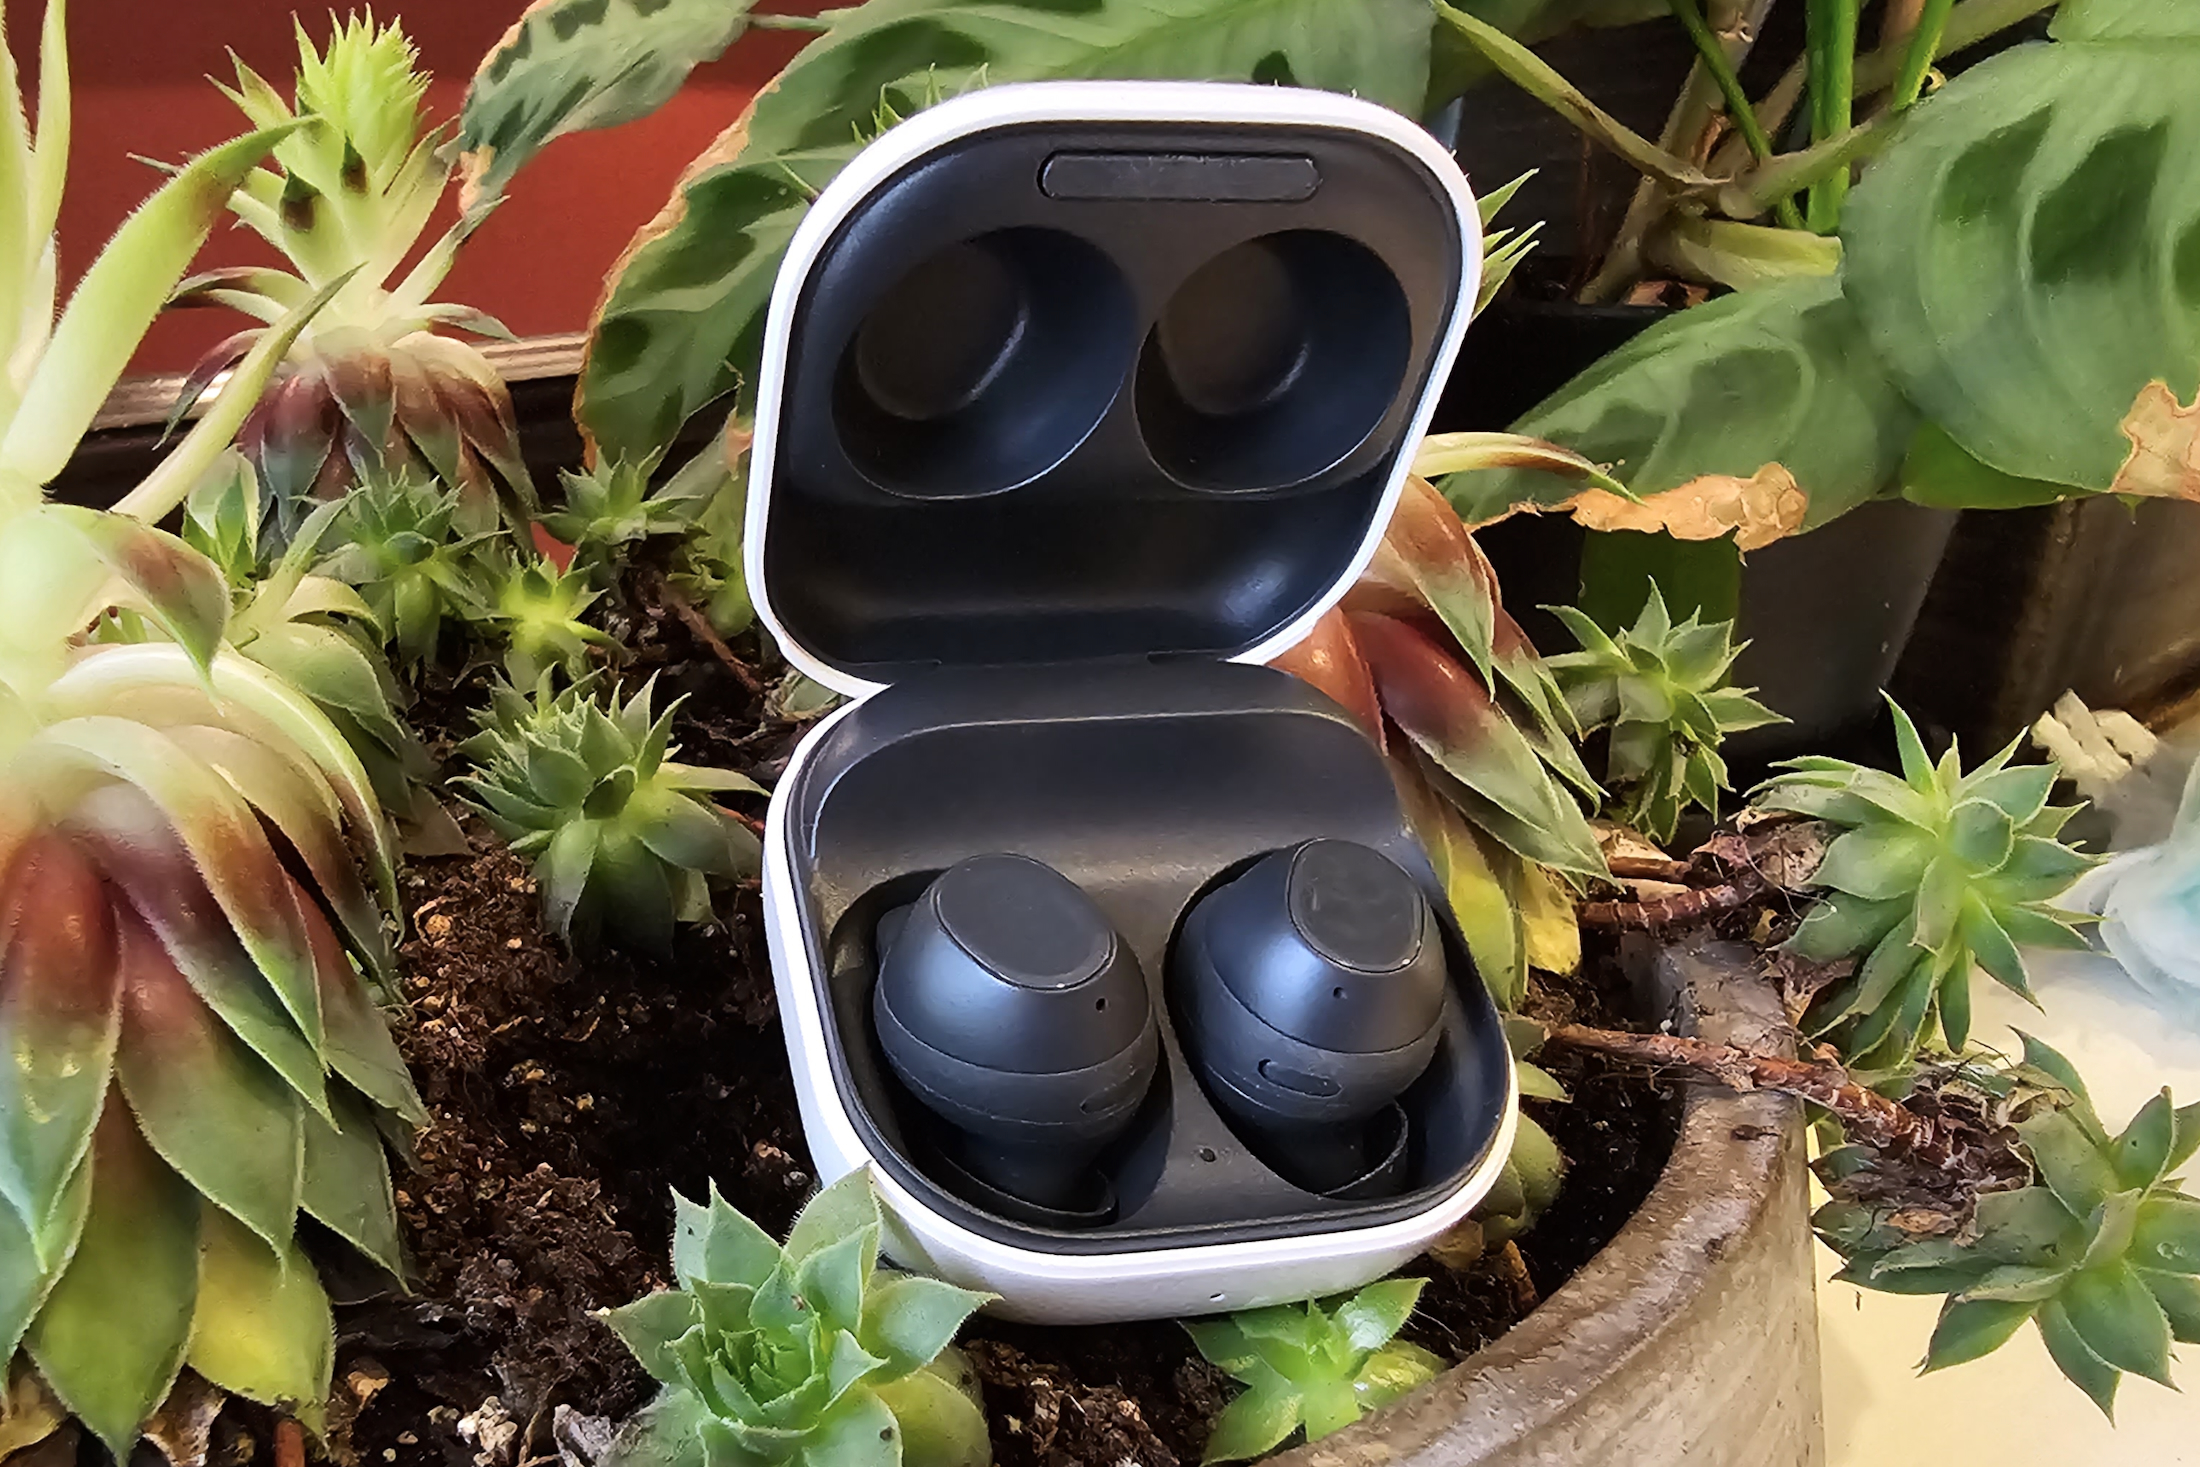 Samsung Galaxy Buds Review: Surprisingly Excellent True Wireless Buds